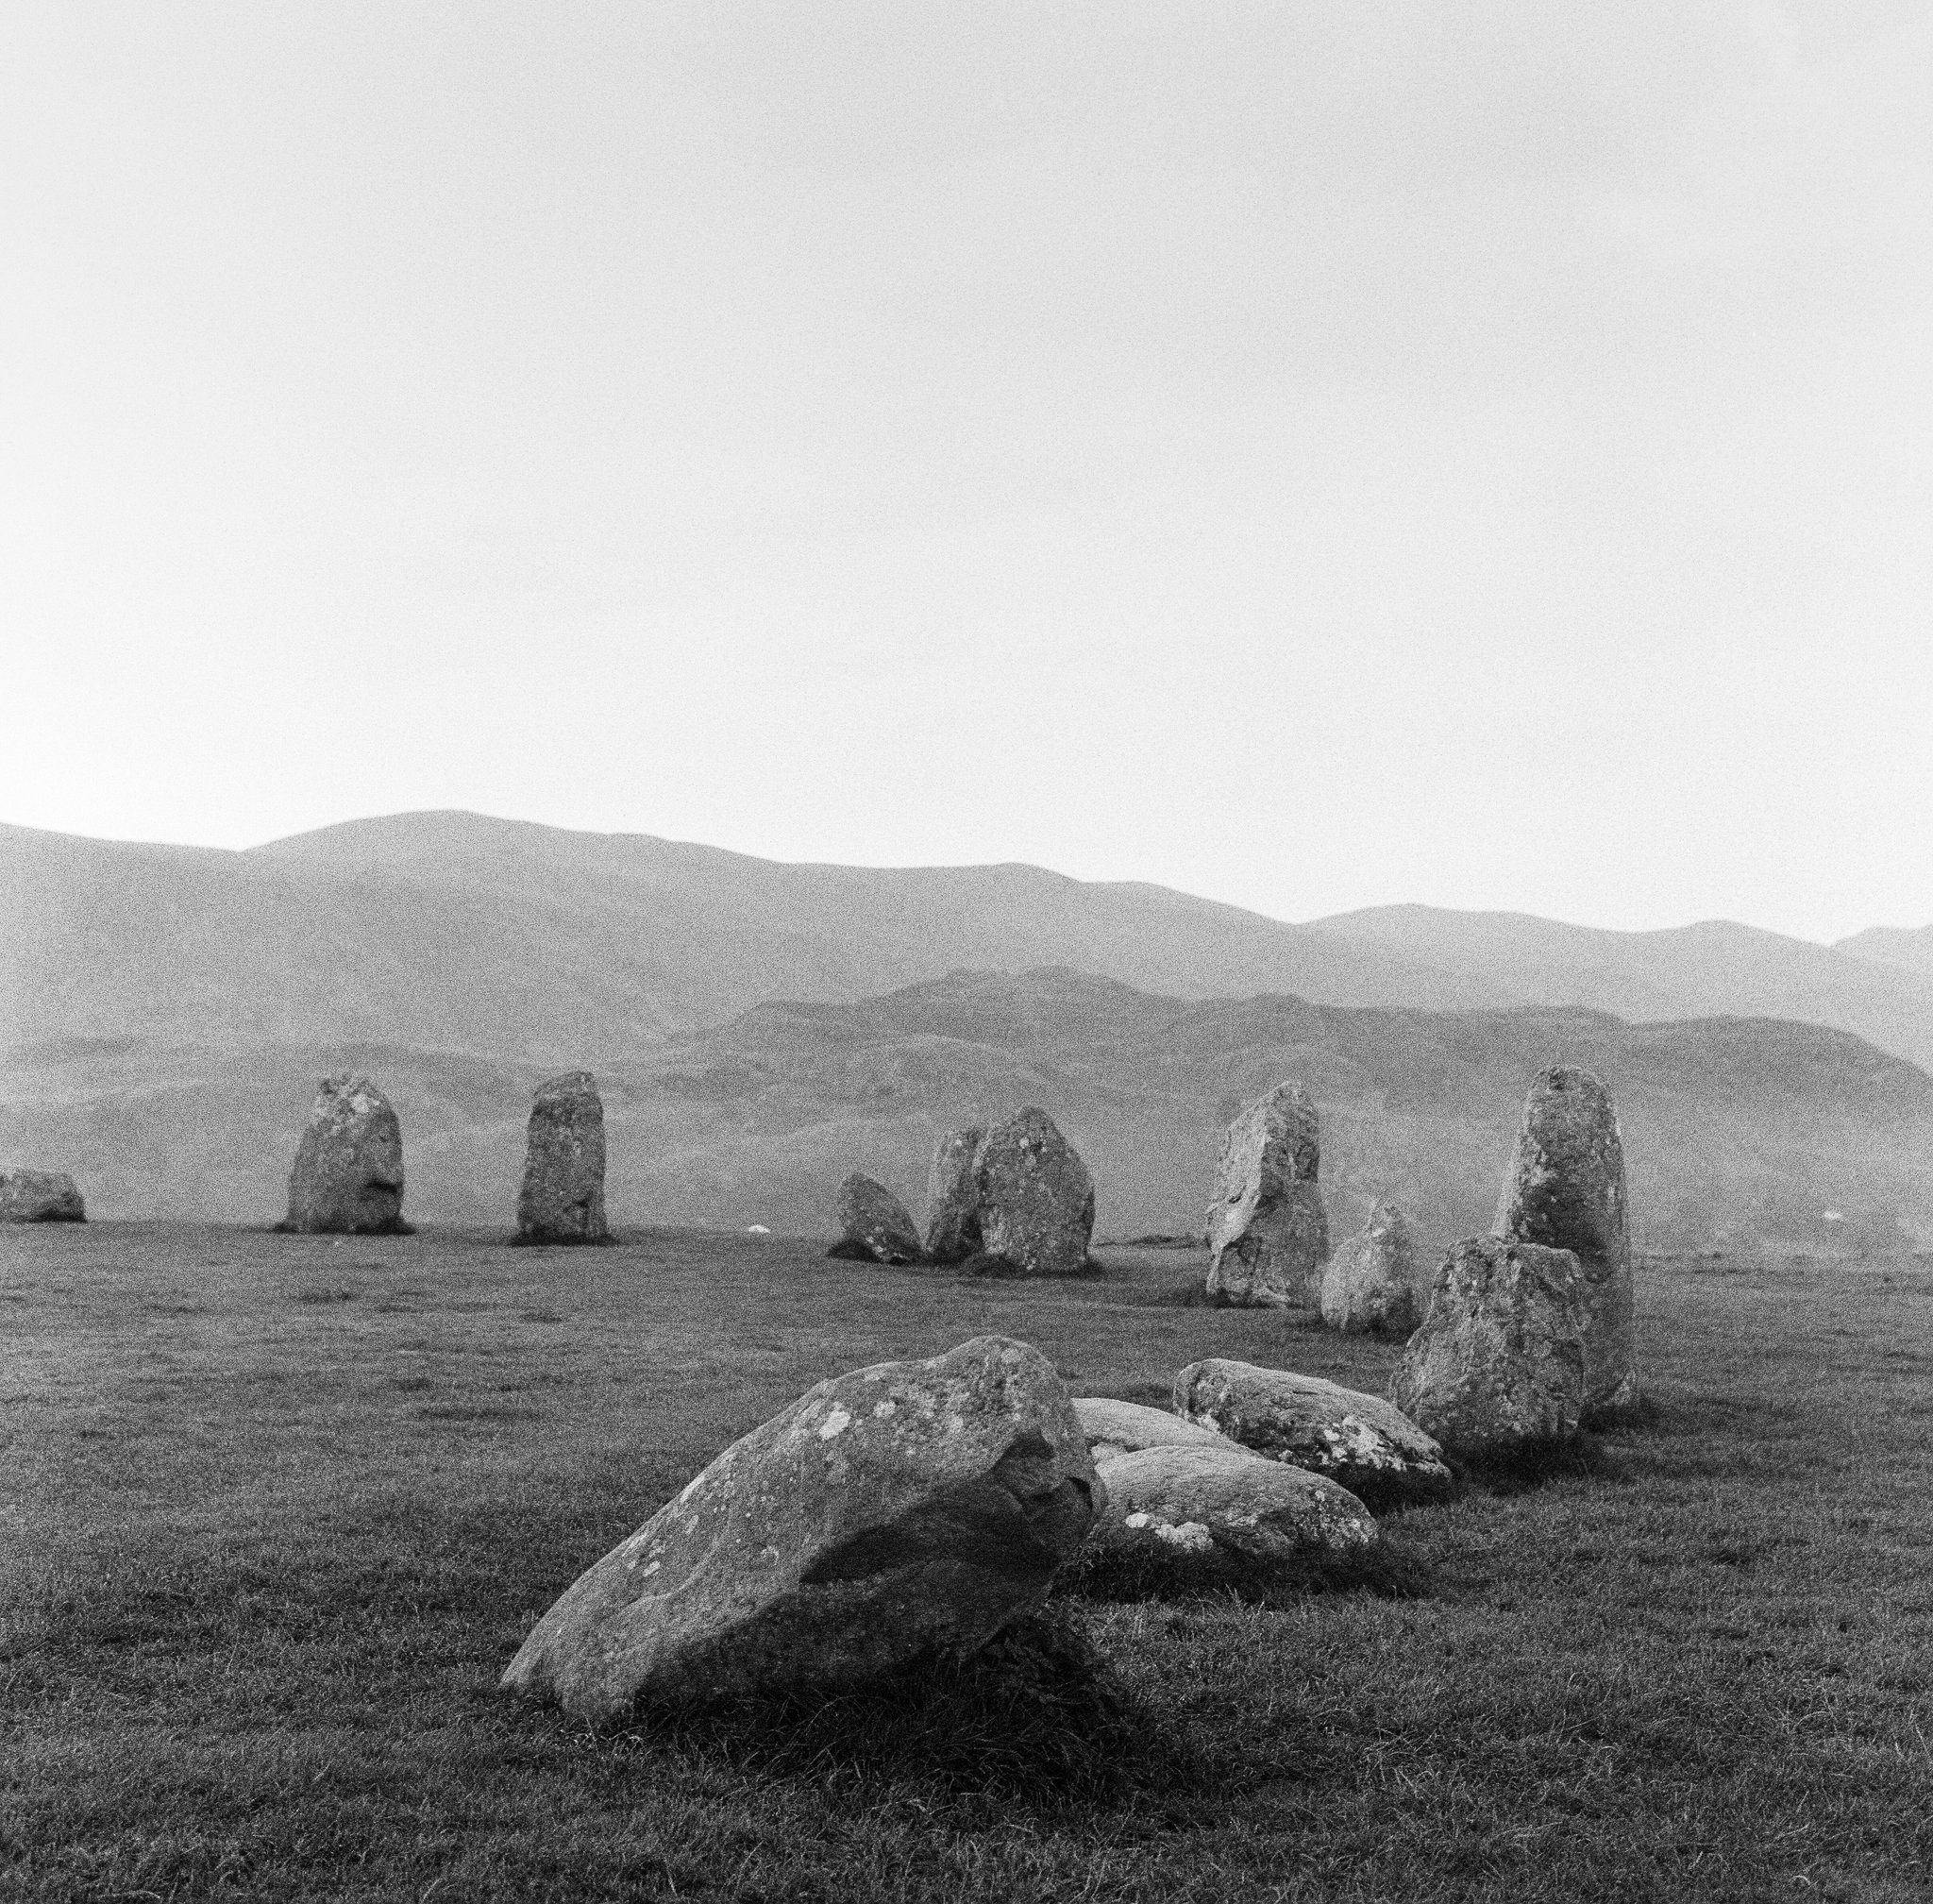 @davejsherwoodPretty much always pull Delta 3200. Just like in this image of Castlerigg Stone Circle, for this week's #ilfordphoto #fridayfavourites theme of #ilforddelta3200pulled, which was shot at 1600.
